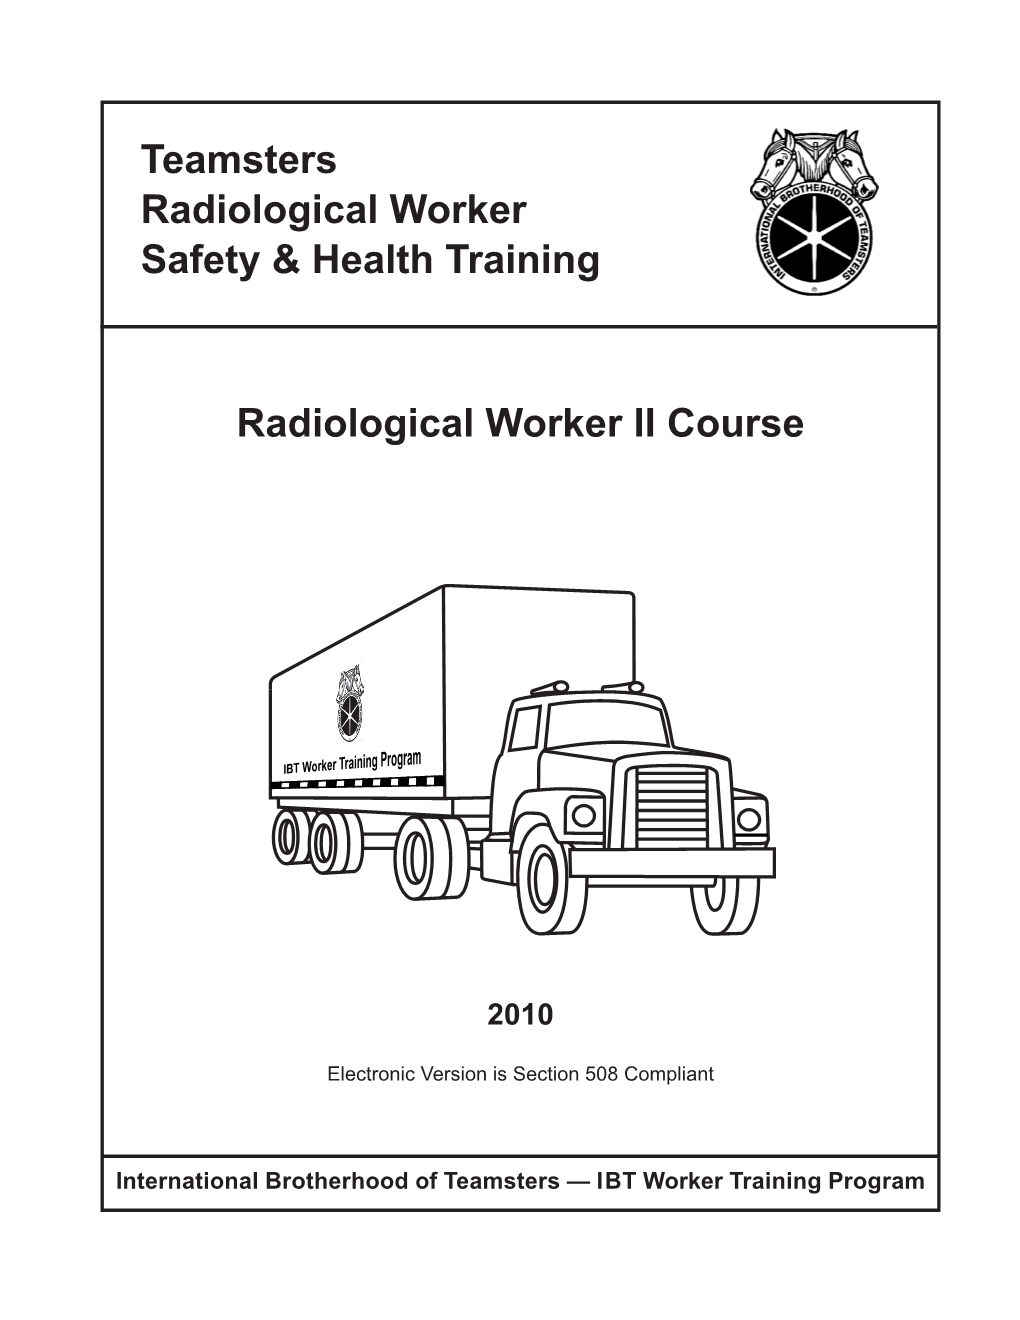 Teamsters Radiological Worker Safety & Health Training